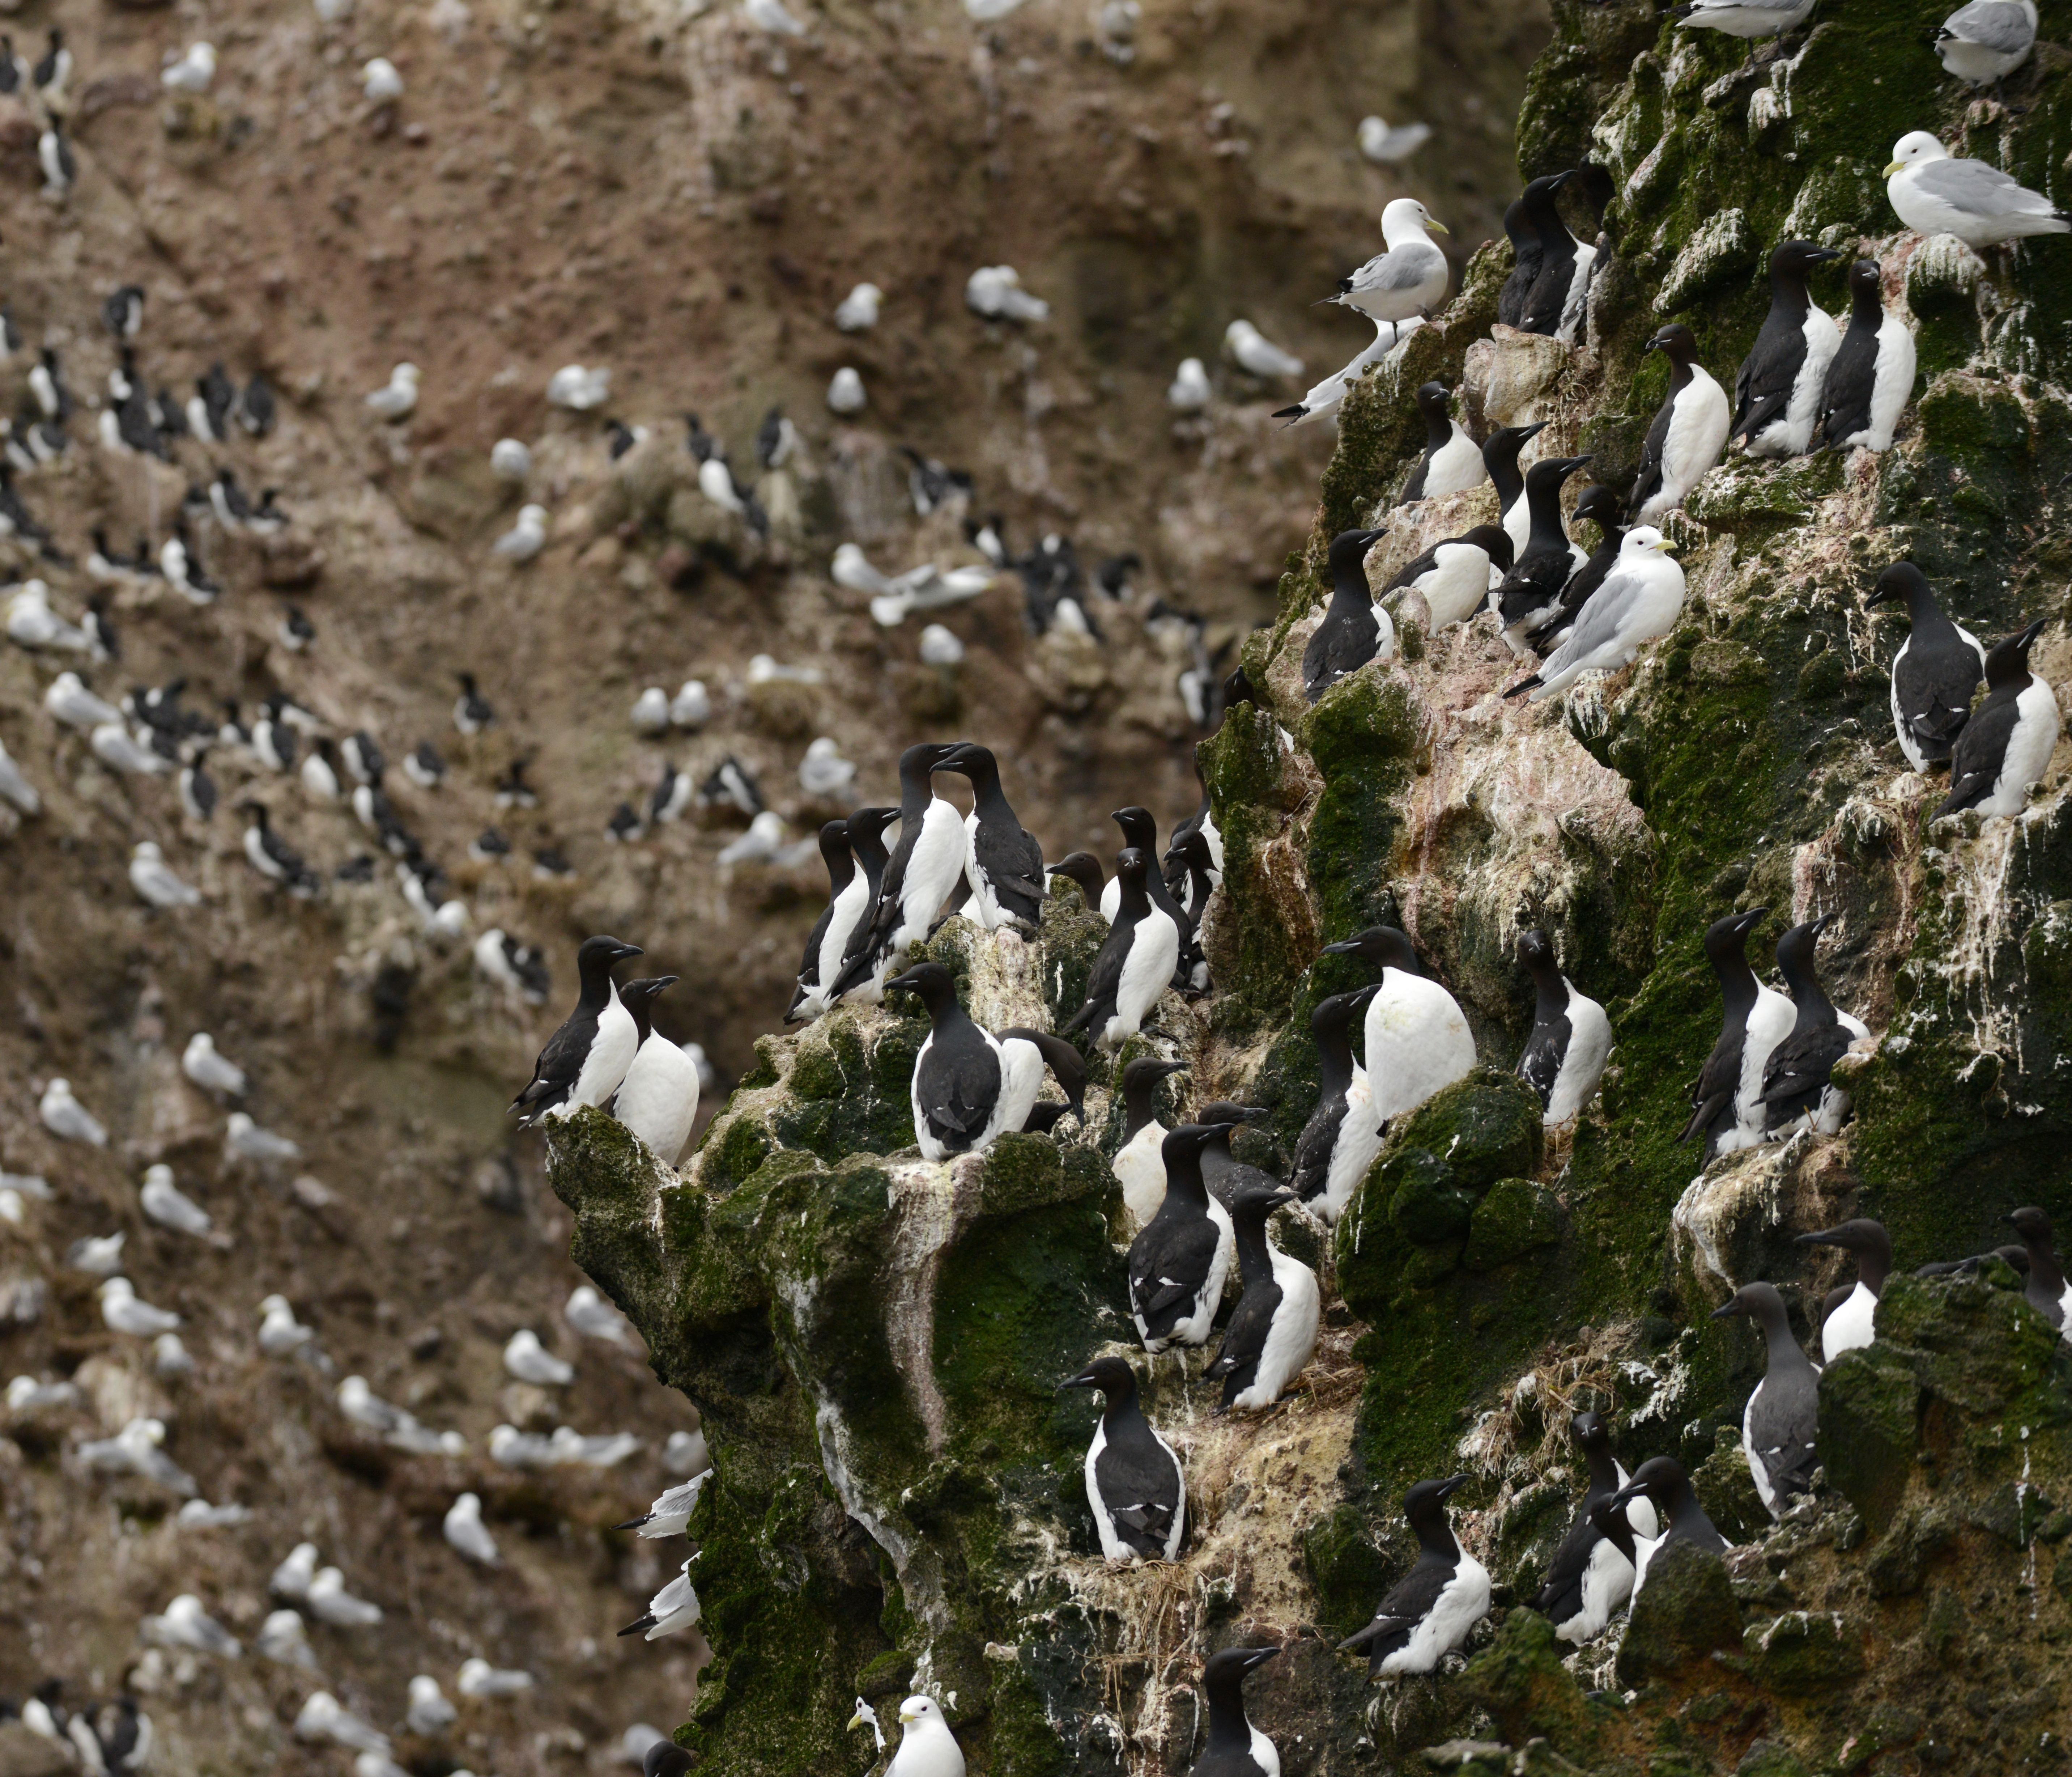 Thick-billed murres cover the rocky cliffs on an Aleutian Island as the US Fish and Wildlife Service research boat R/V Tiglax travels among the Aleutian Islands on Friday, June 5, 2015. Scientists on the R/V Tiglax conduct research in the Alaska Maritime National Wildlife Refuge. (Bob Hallinen / Alaska Dispatch News file photo)